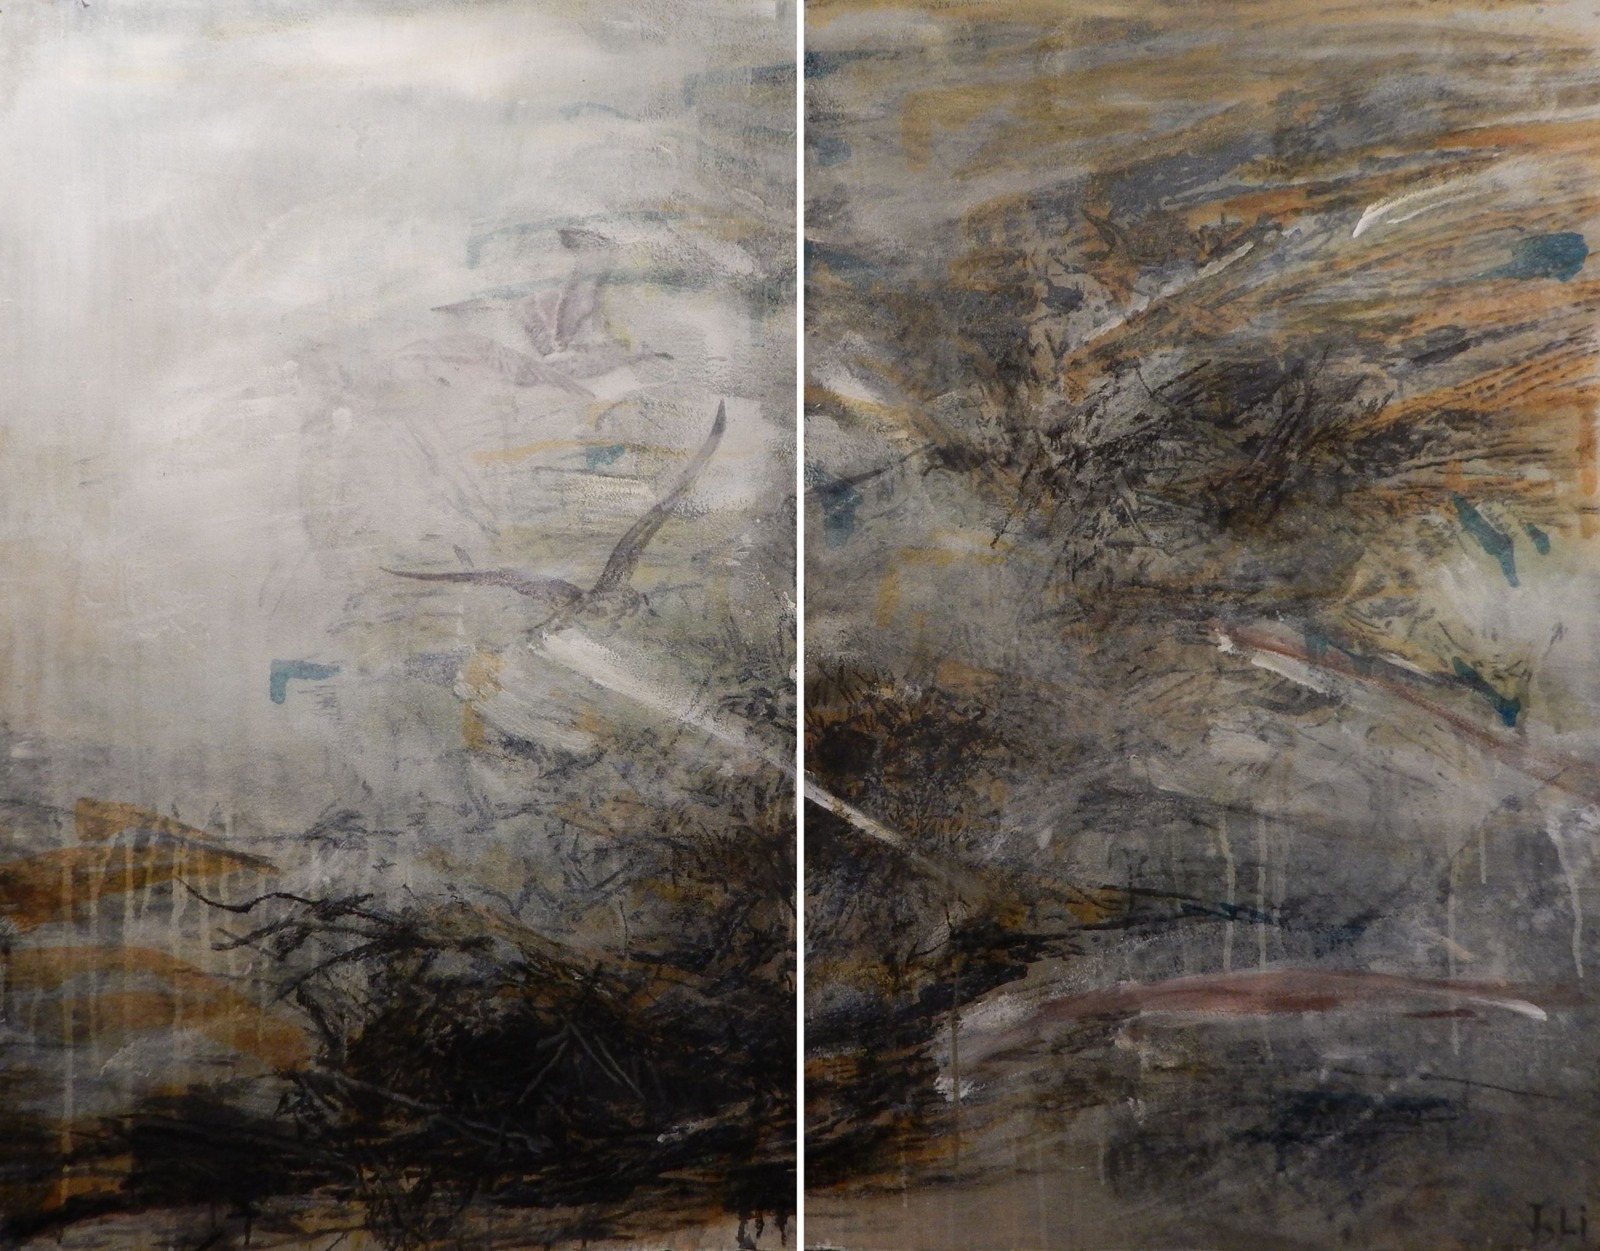 "Nowhere to Place IX," a watercolor diptych by J. Li